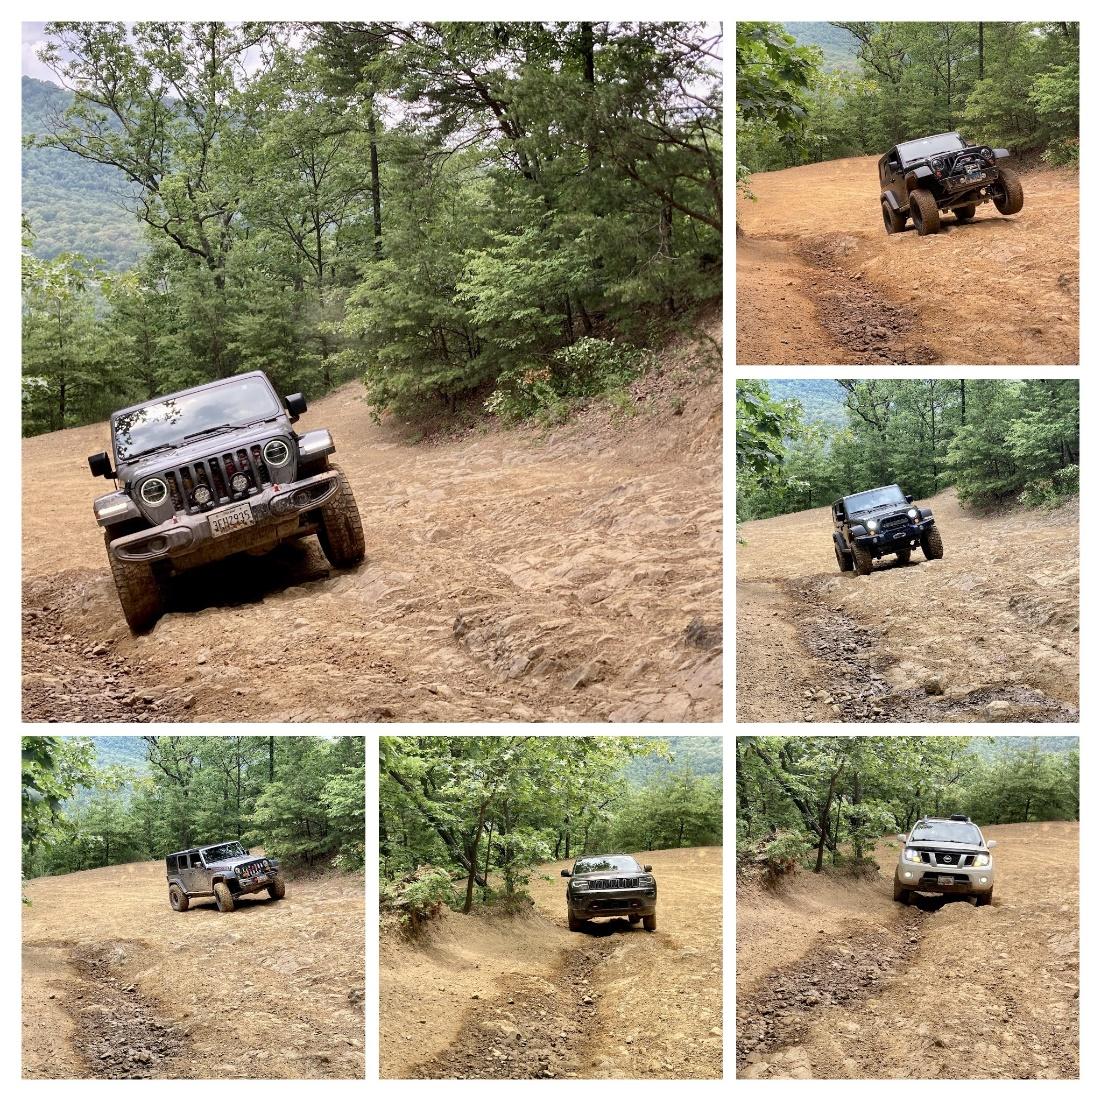 A collage of a jeep driving through a dirt road

Description automatically generated